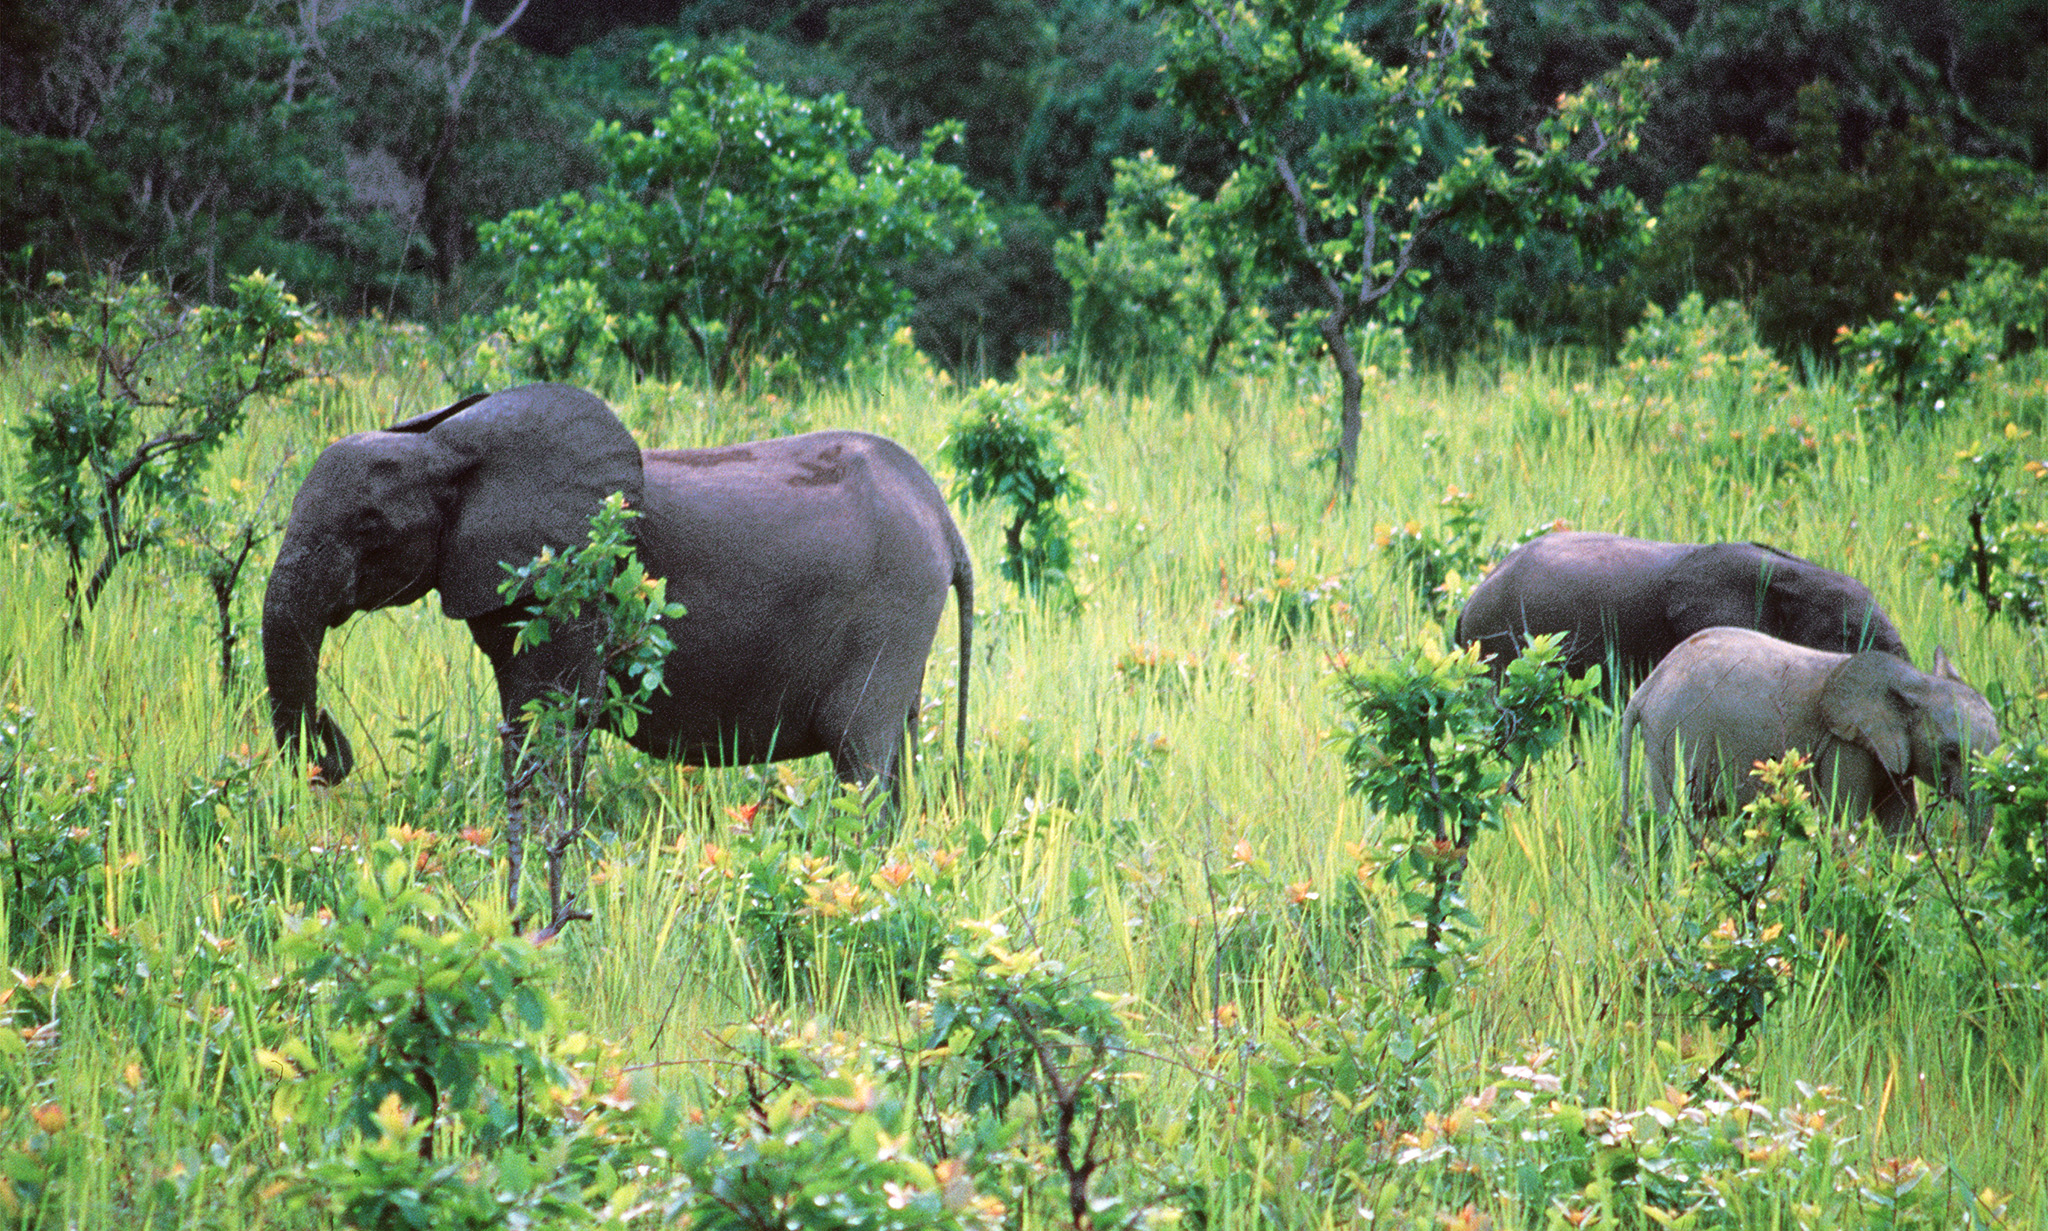 (FILES) This file photo taken on November 28, 1999 shows elephants eating in La Lope National Parc, central Gabon. Poachers are killing elephants for their ivory at an alarming rate in the central African nation of Gabon, leading to a loss of 80 percent of the population in the last decade, according a report in the journal Current Biology, AFP reported on February 20, 2017. / AFP PHOTO / -